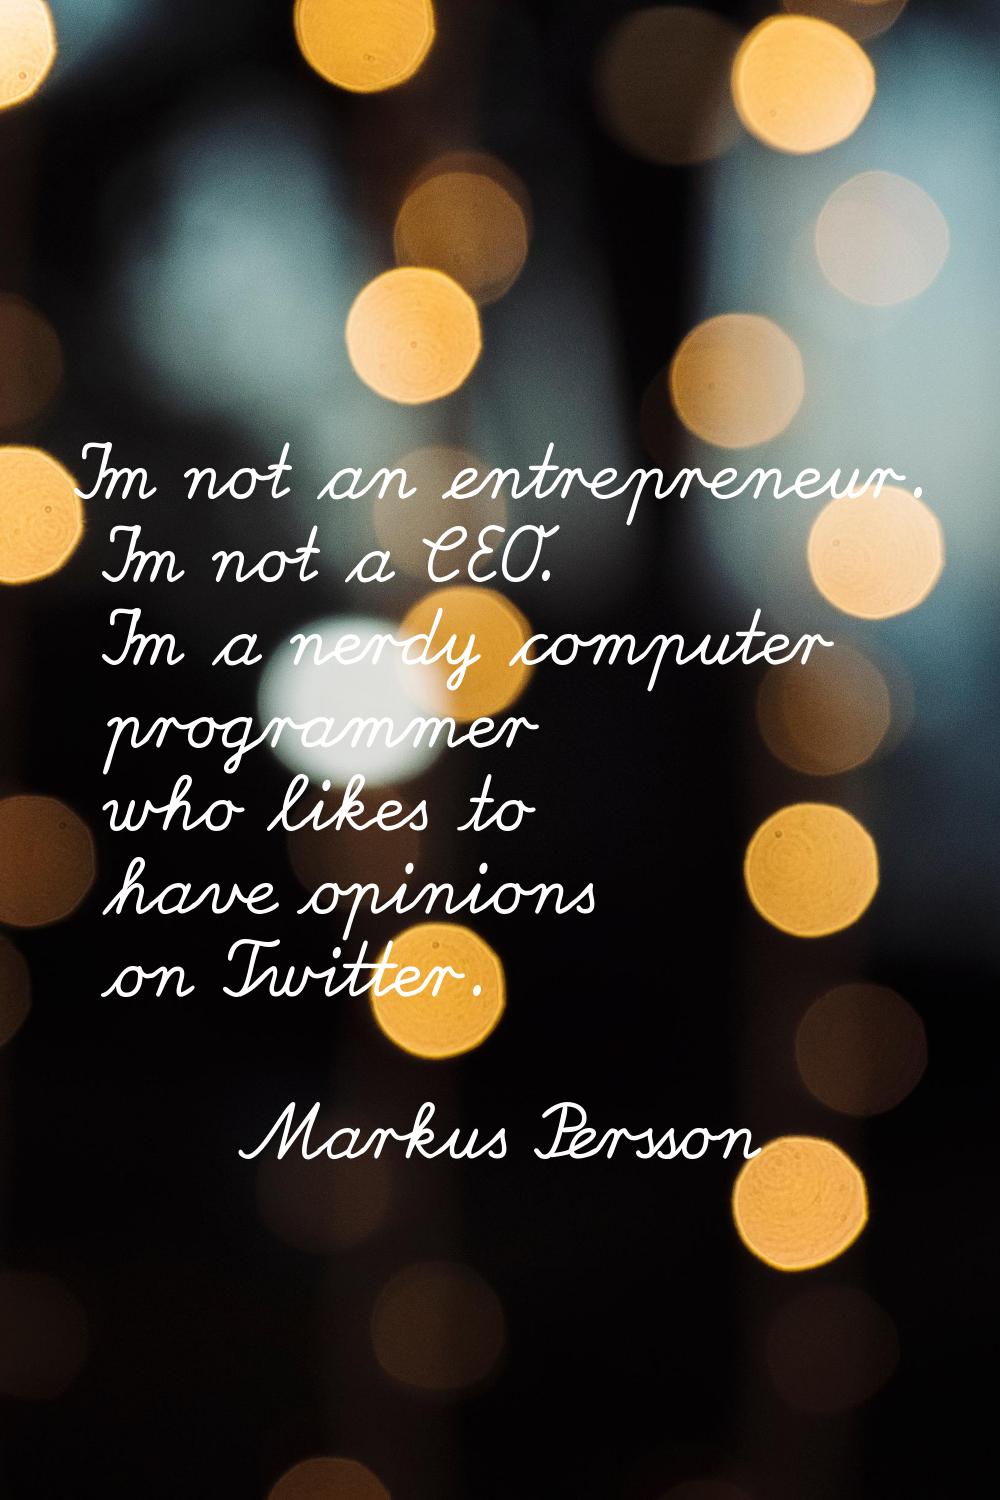 I'm not an entrepreneur. I'm not a CEO. I'm a nerdy computer programmer who likes to have opinions 